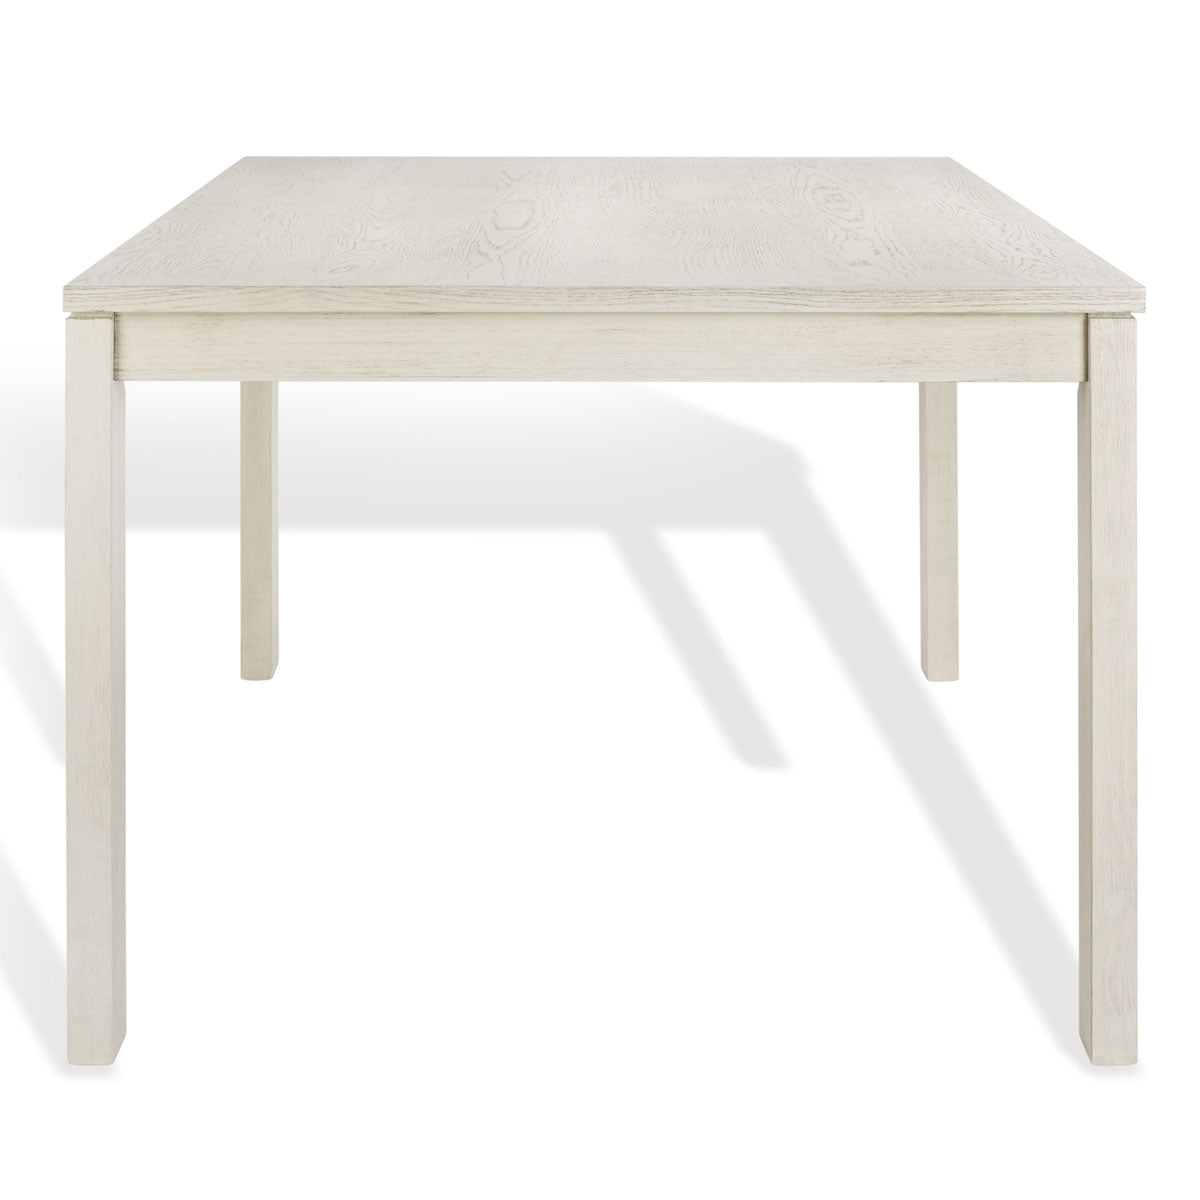 Safavieh Couture Deirdra Wood Rectangle Dining Table - White Wash